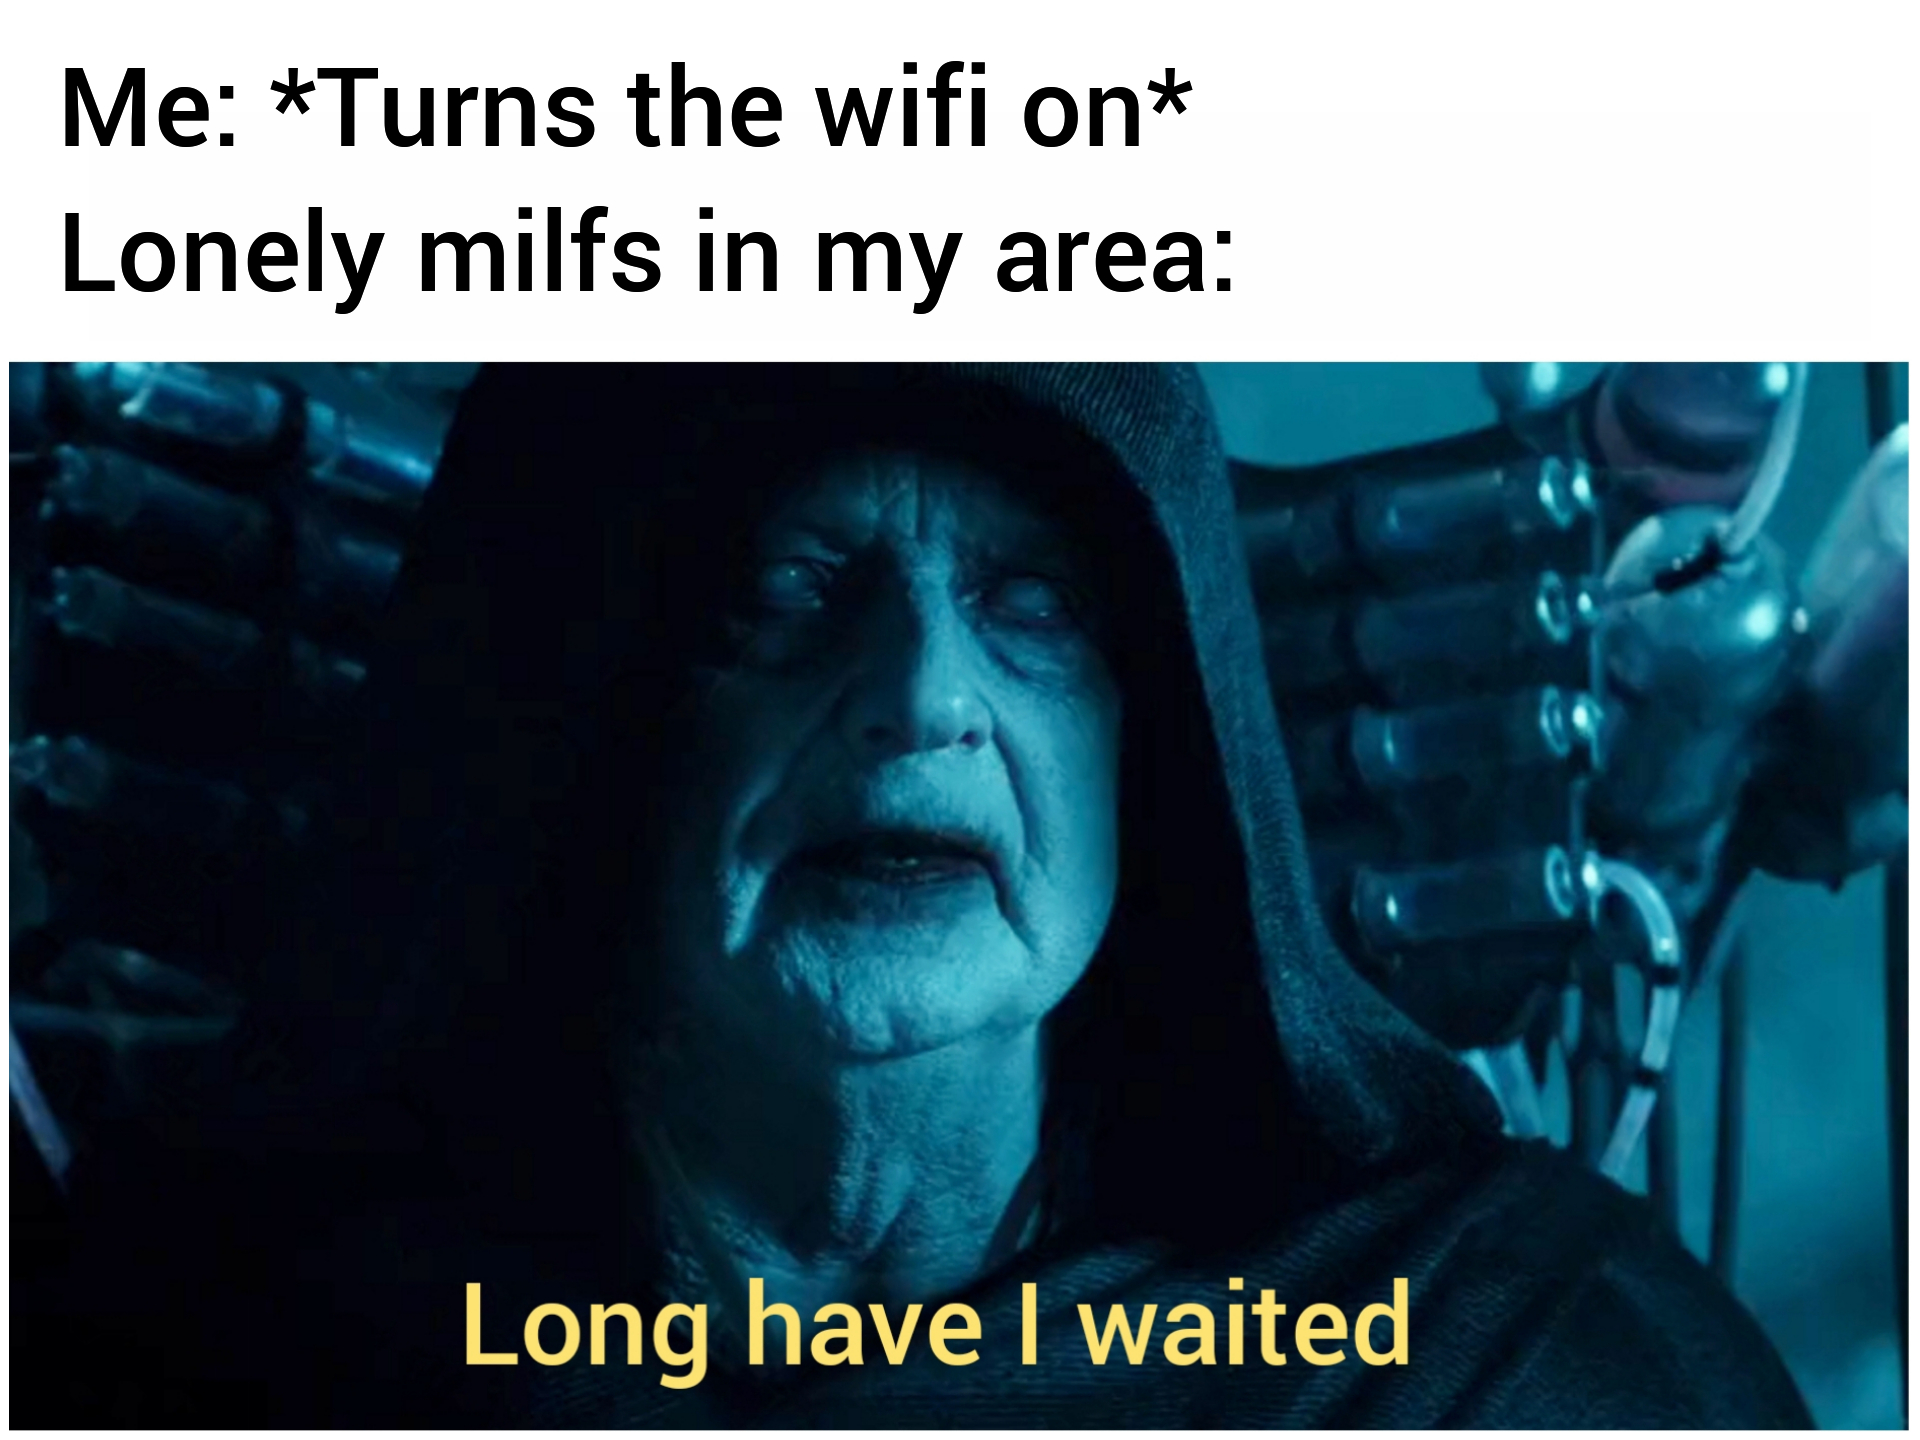 palpatine ix - Me Turns the wifi on Lonely milfs in my area Long have I waited